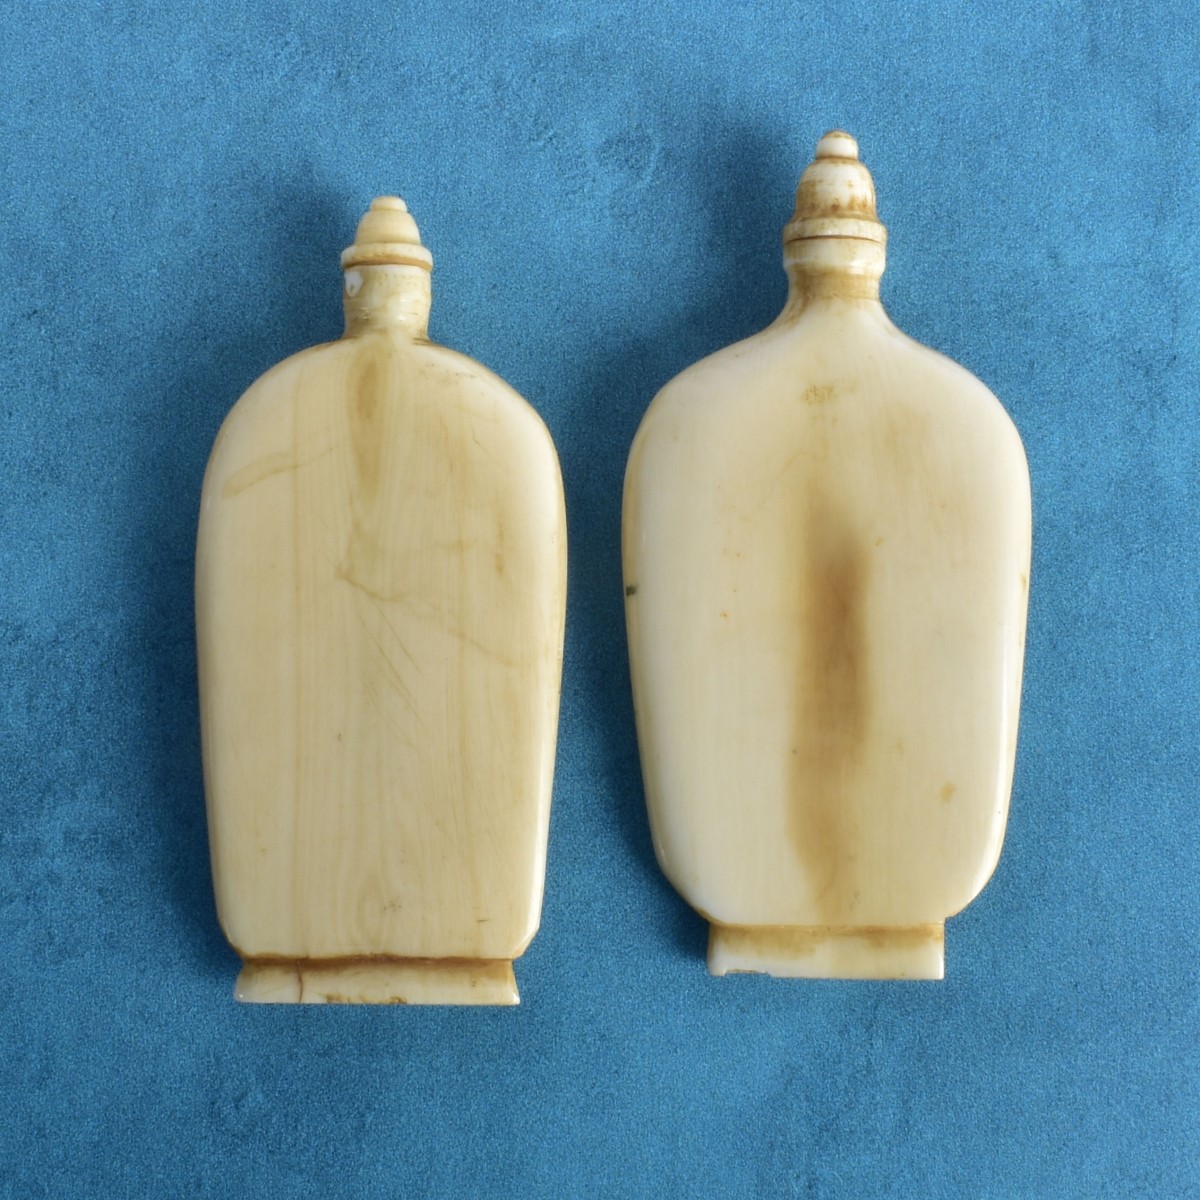 Two Antique Chinese Snuff Bottles